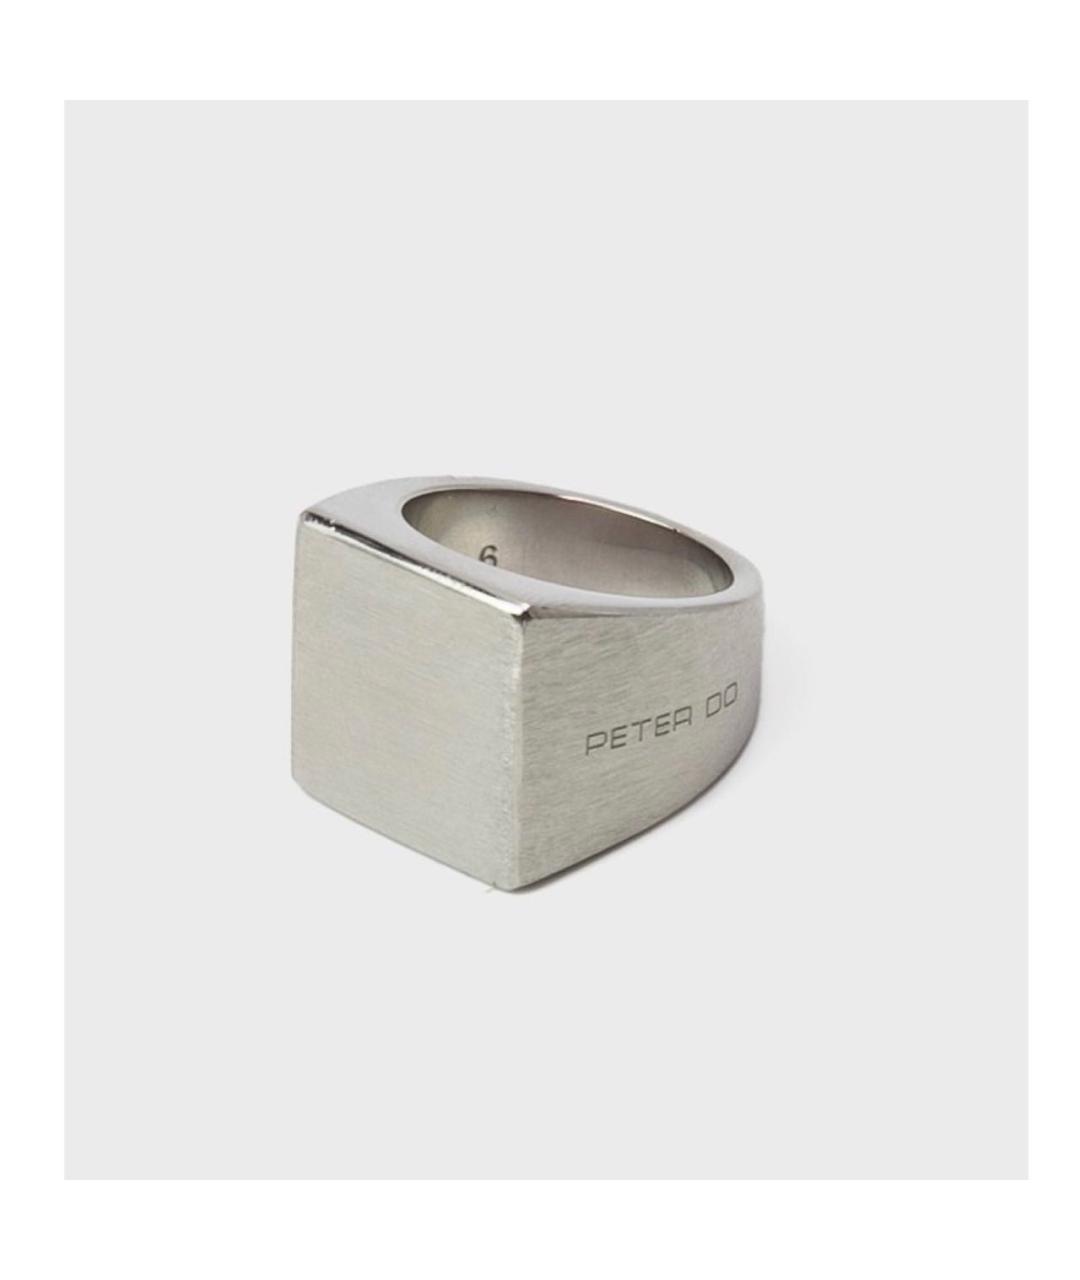 Peter Do silver insignia ring - リング(指輪)